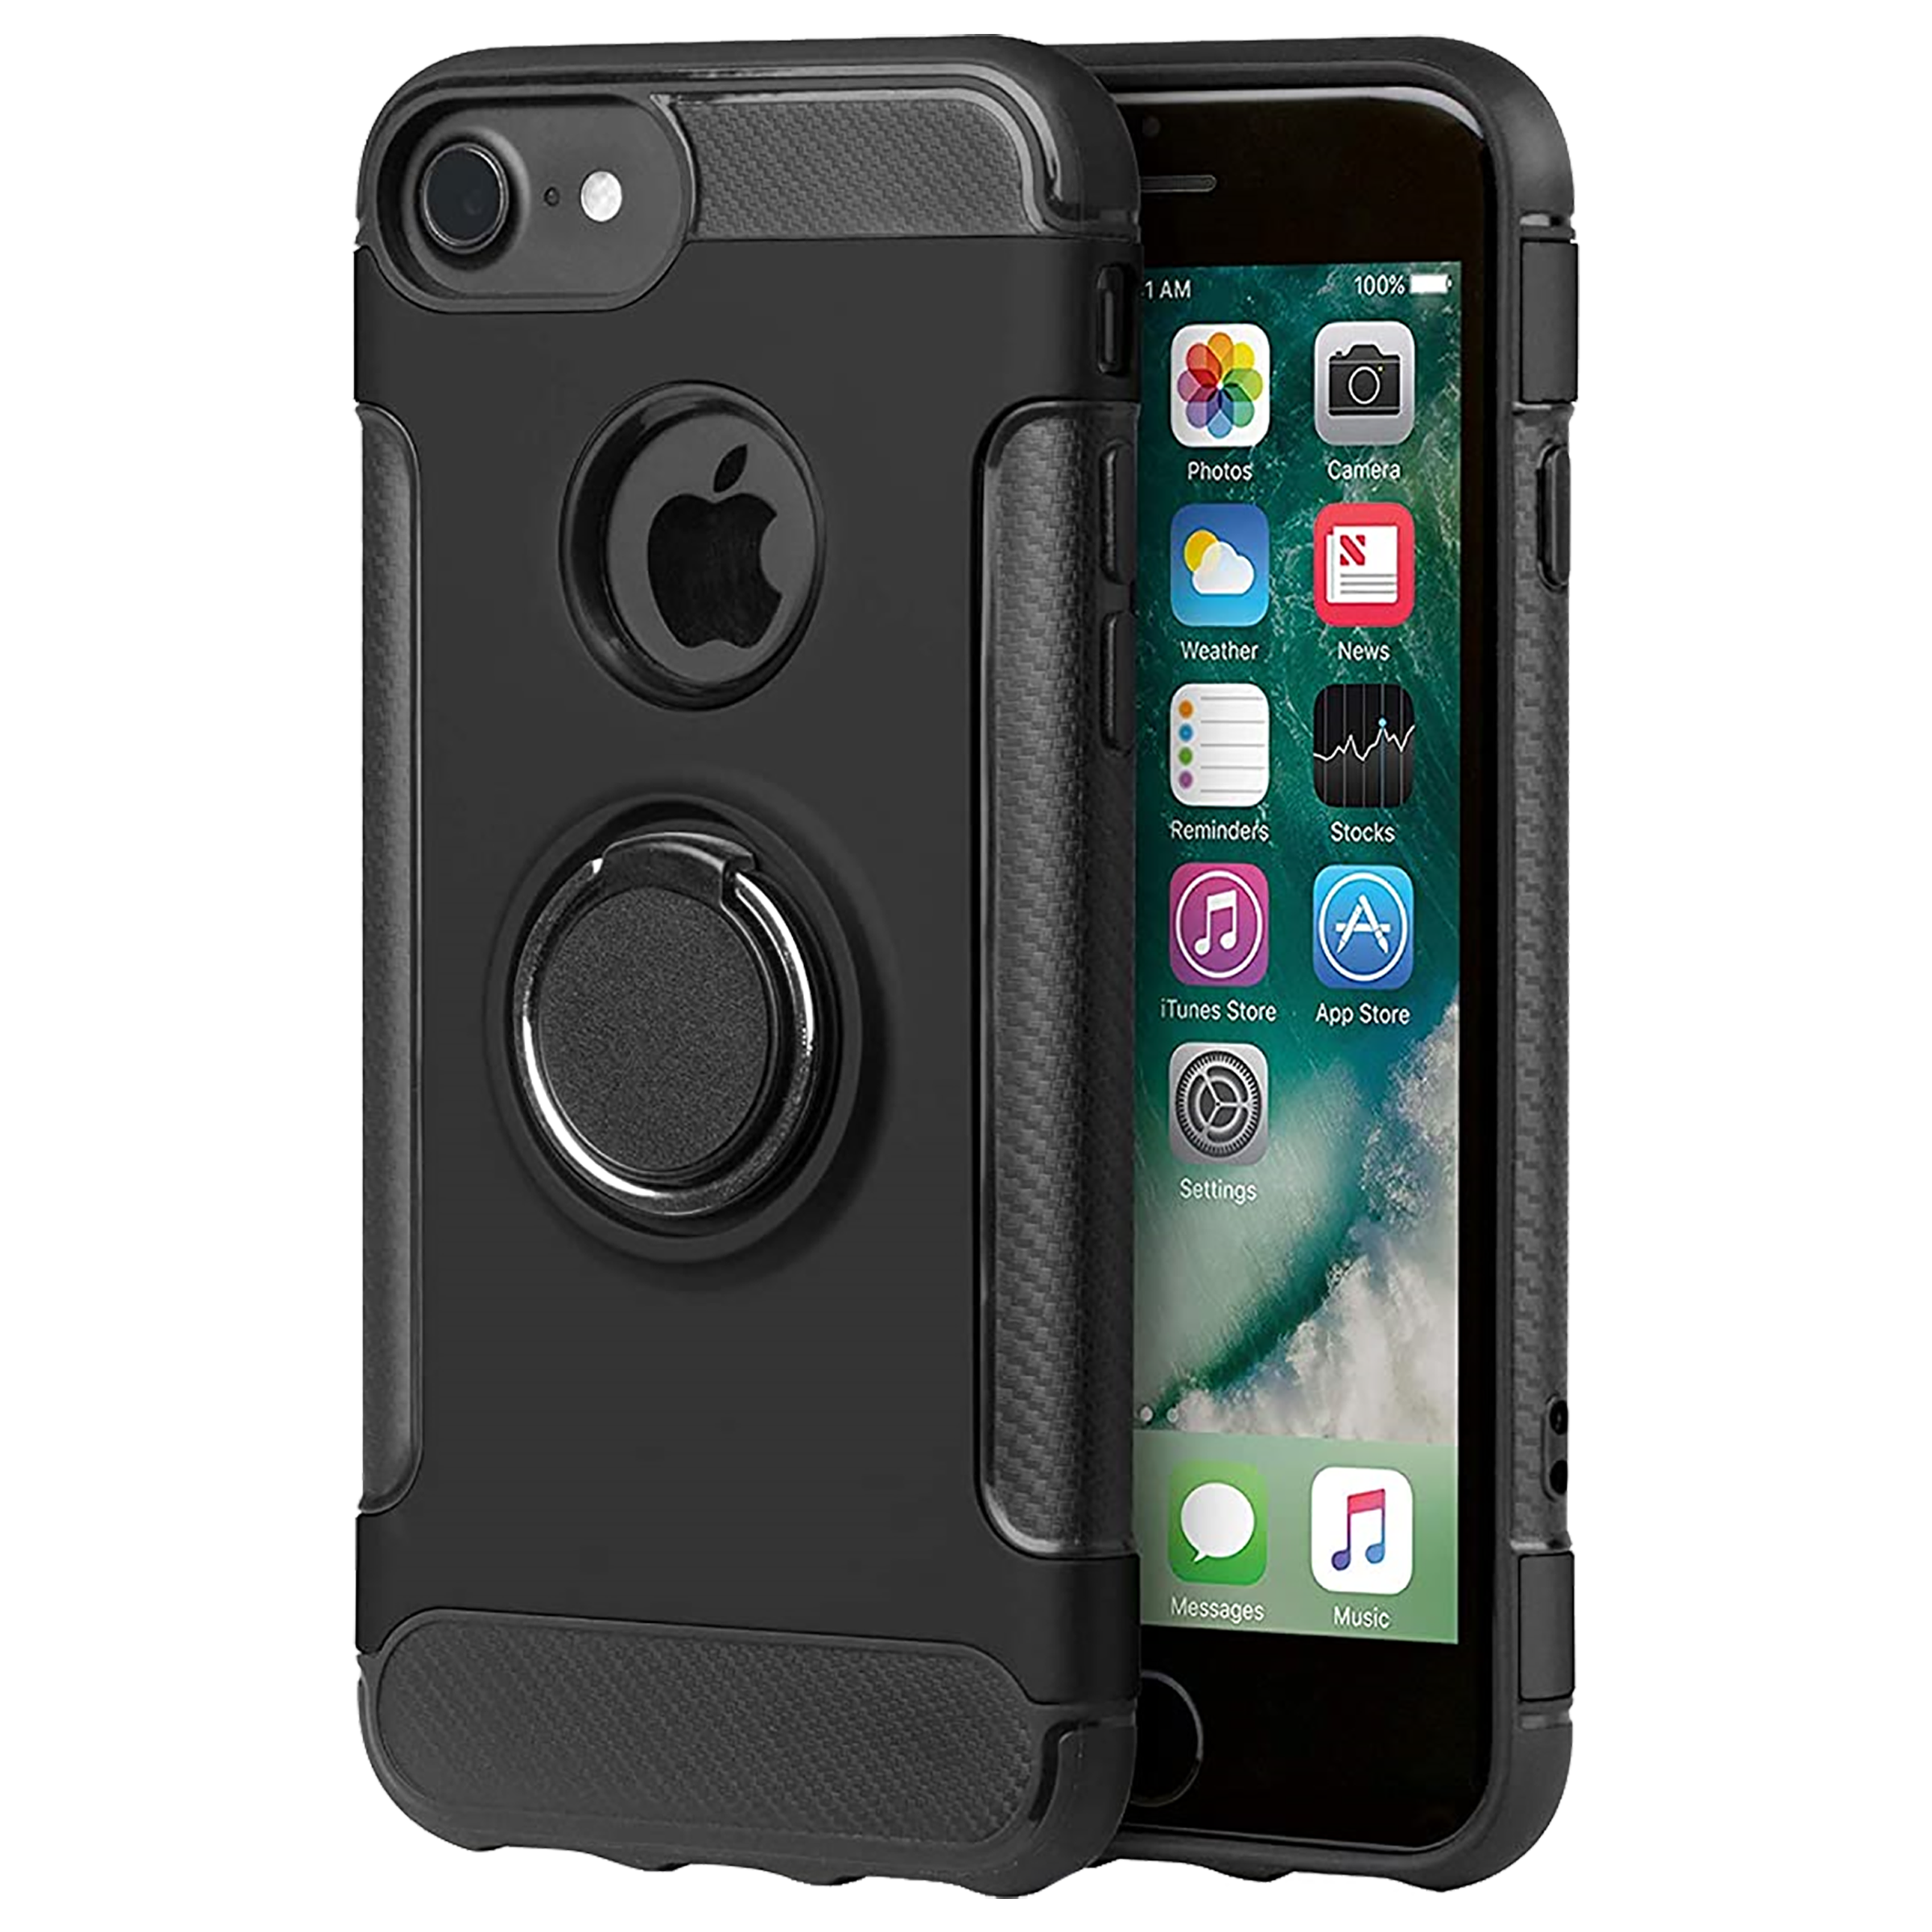 AT&T - AT&T RPC-1 Back Case For iPhone 7/iPhone 8 (Built-in Ring Holder, RPC-1, Black)